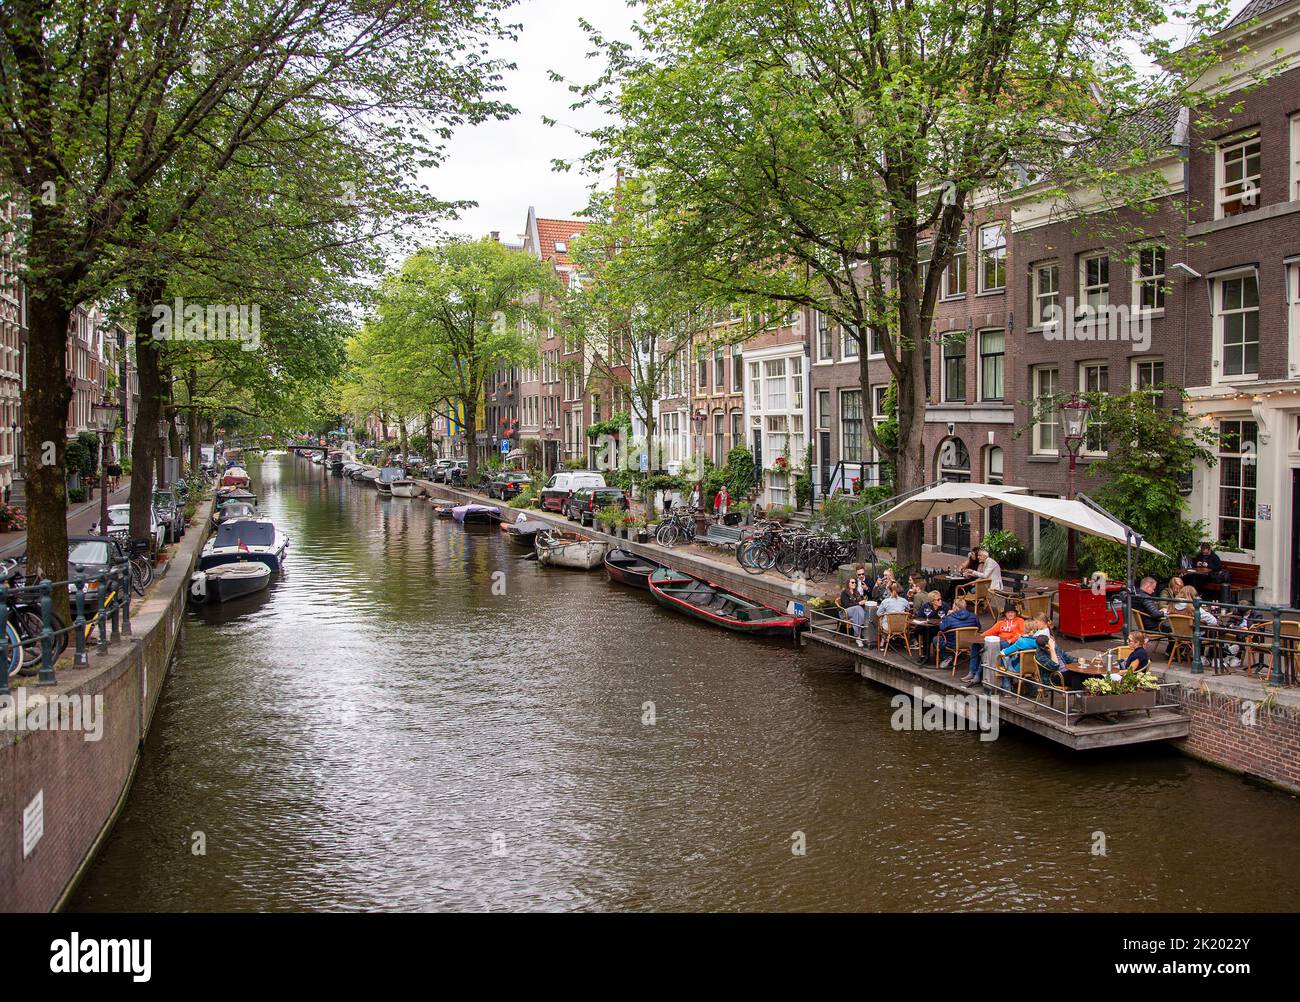 A cafe along a canal in Amsterdam Stock Photo